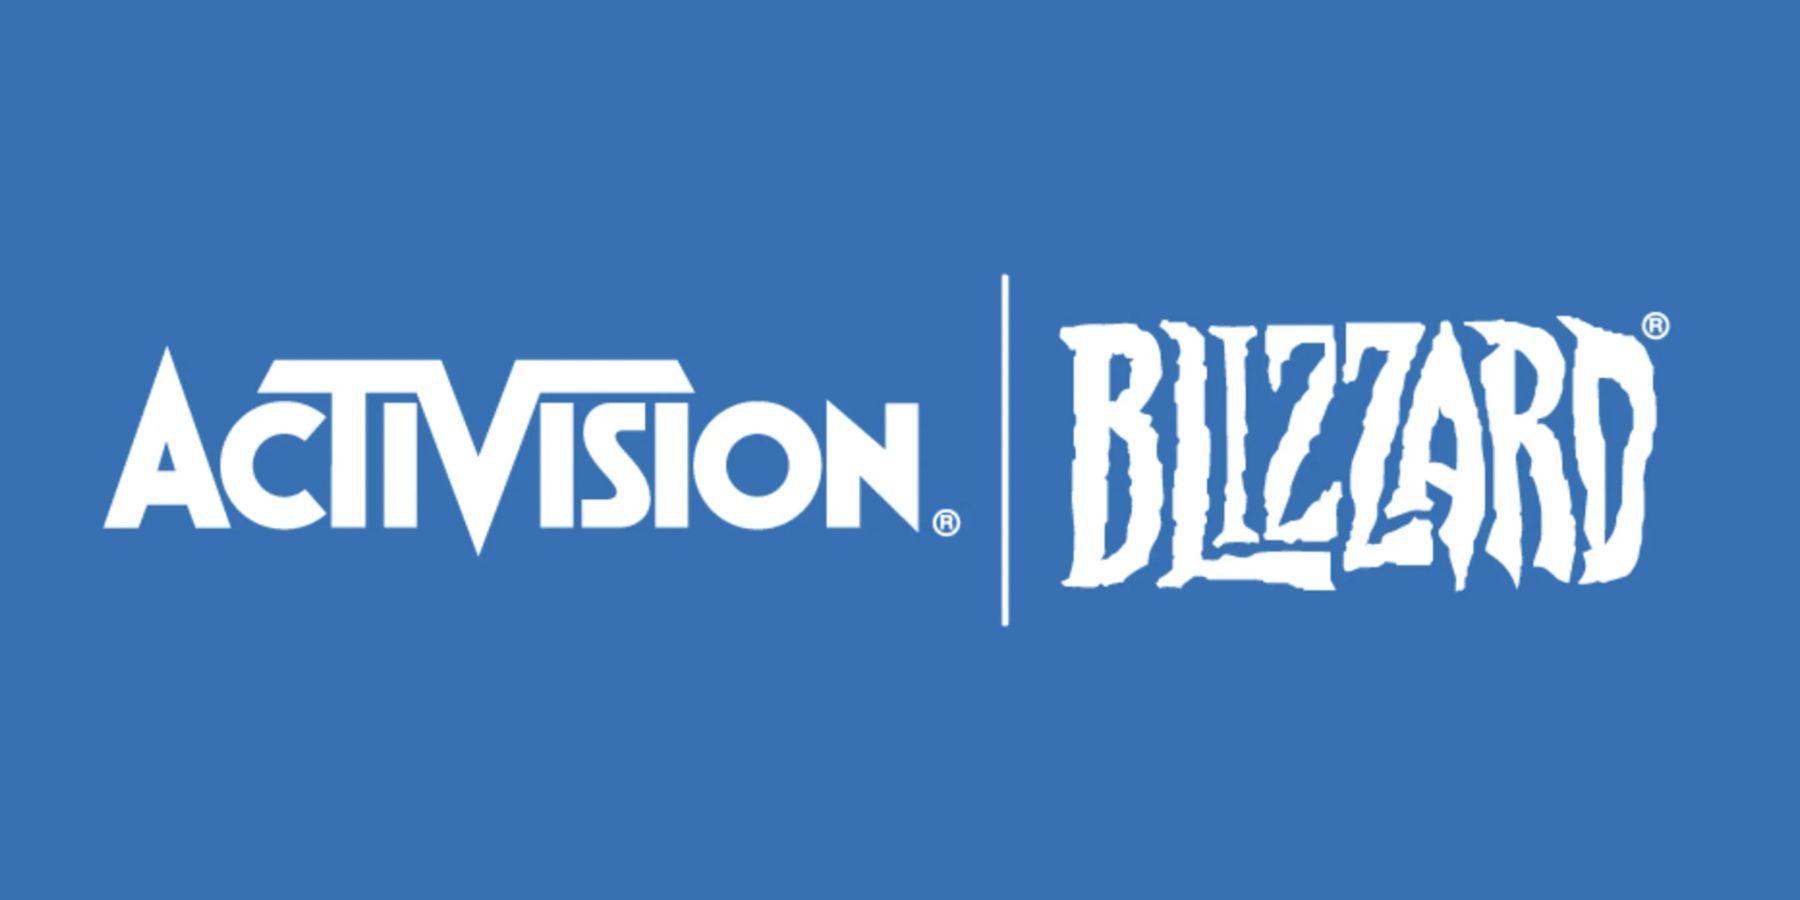 Activision Blizzard Return To Office